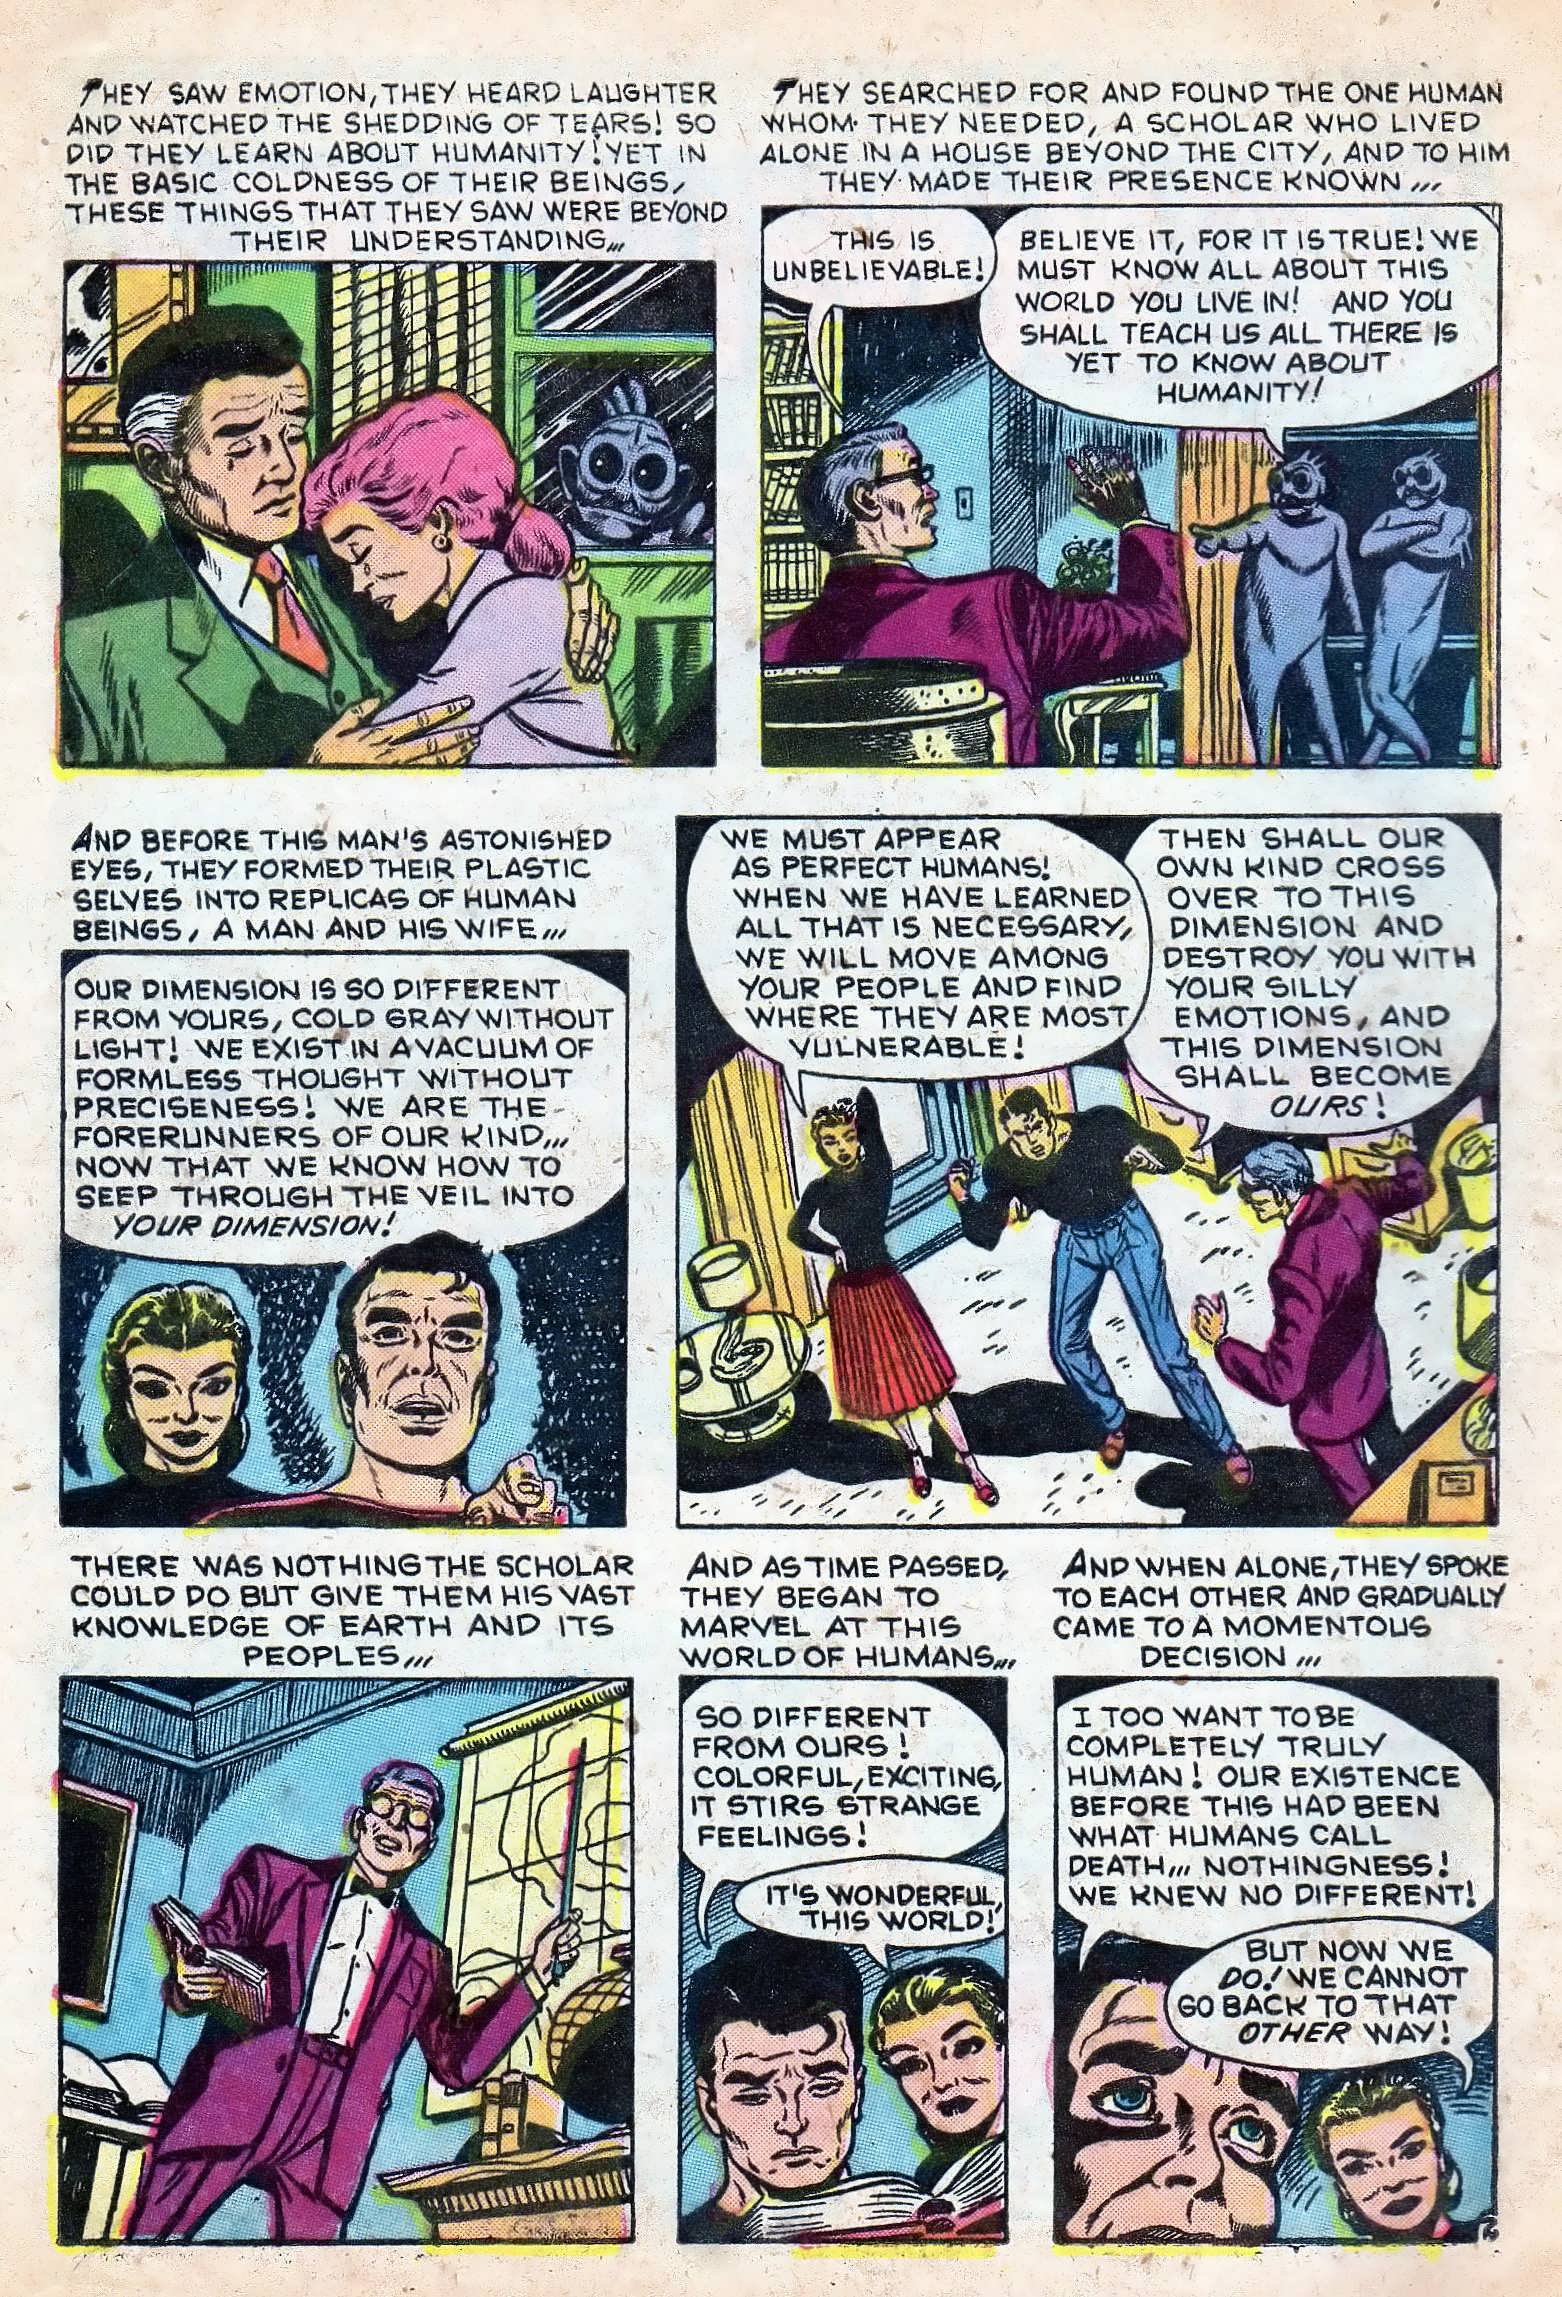 Marvel Tales (1949) 141 Page 3